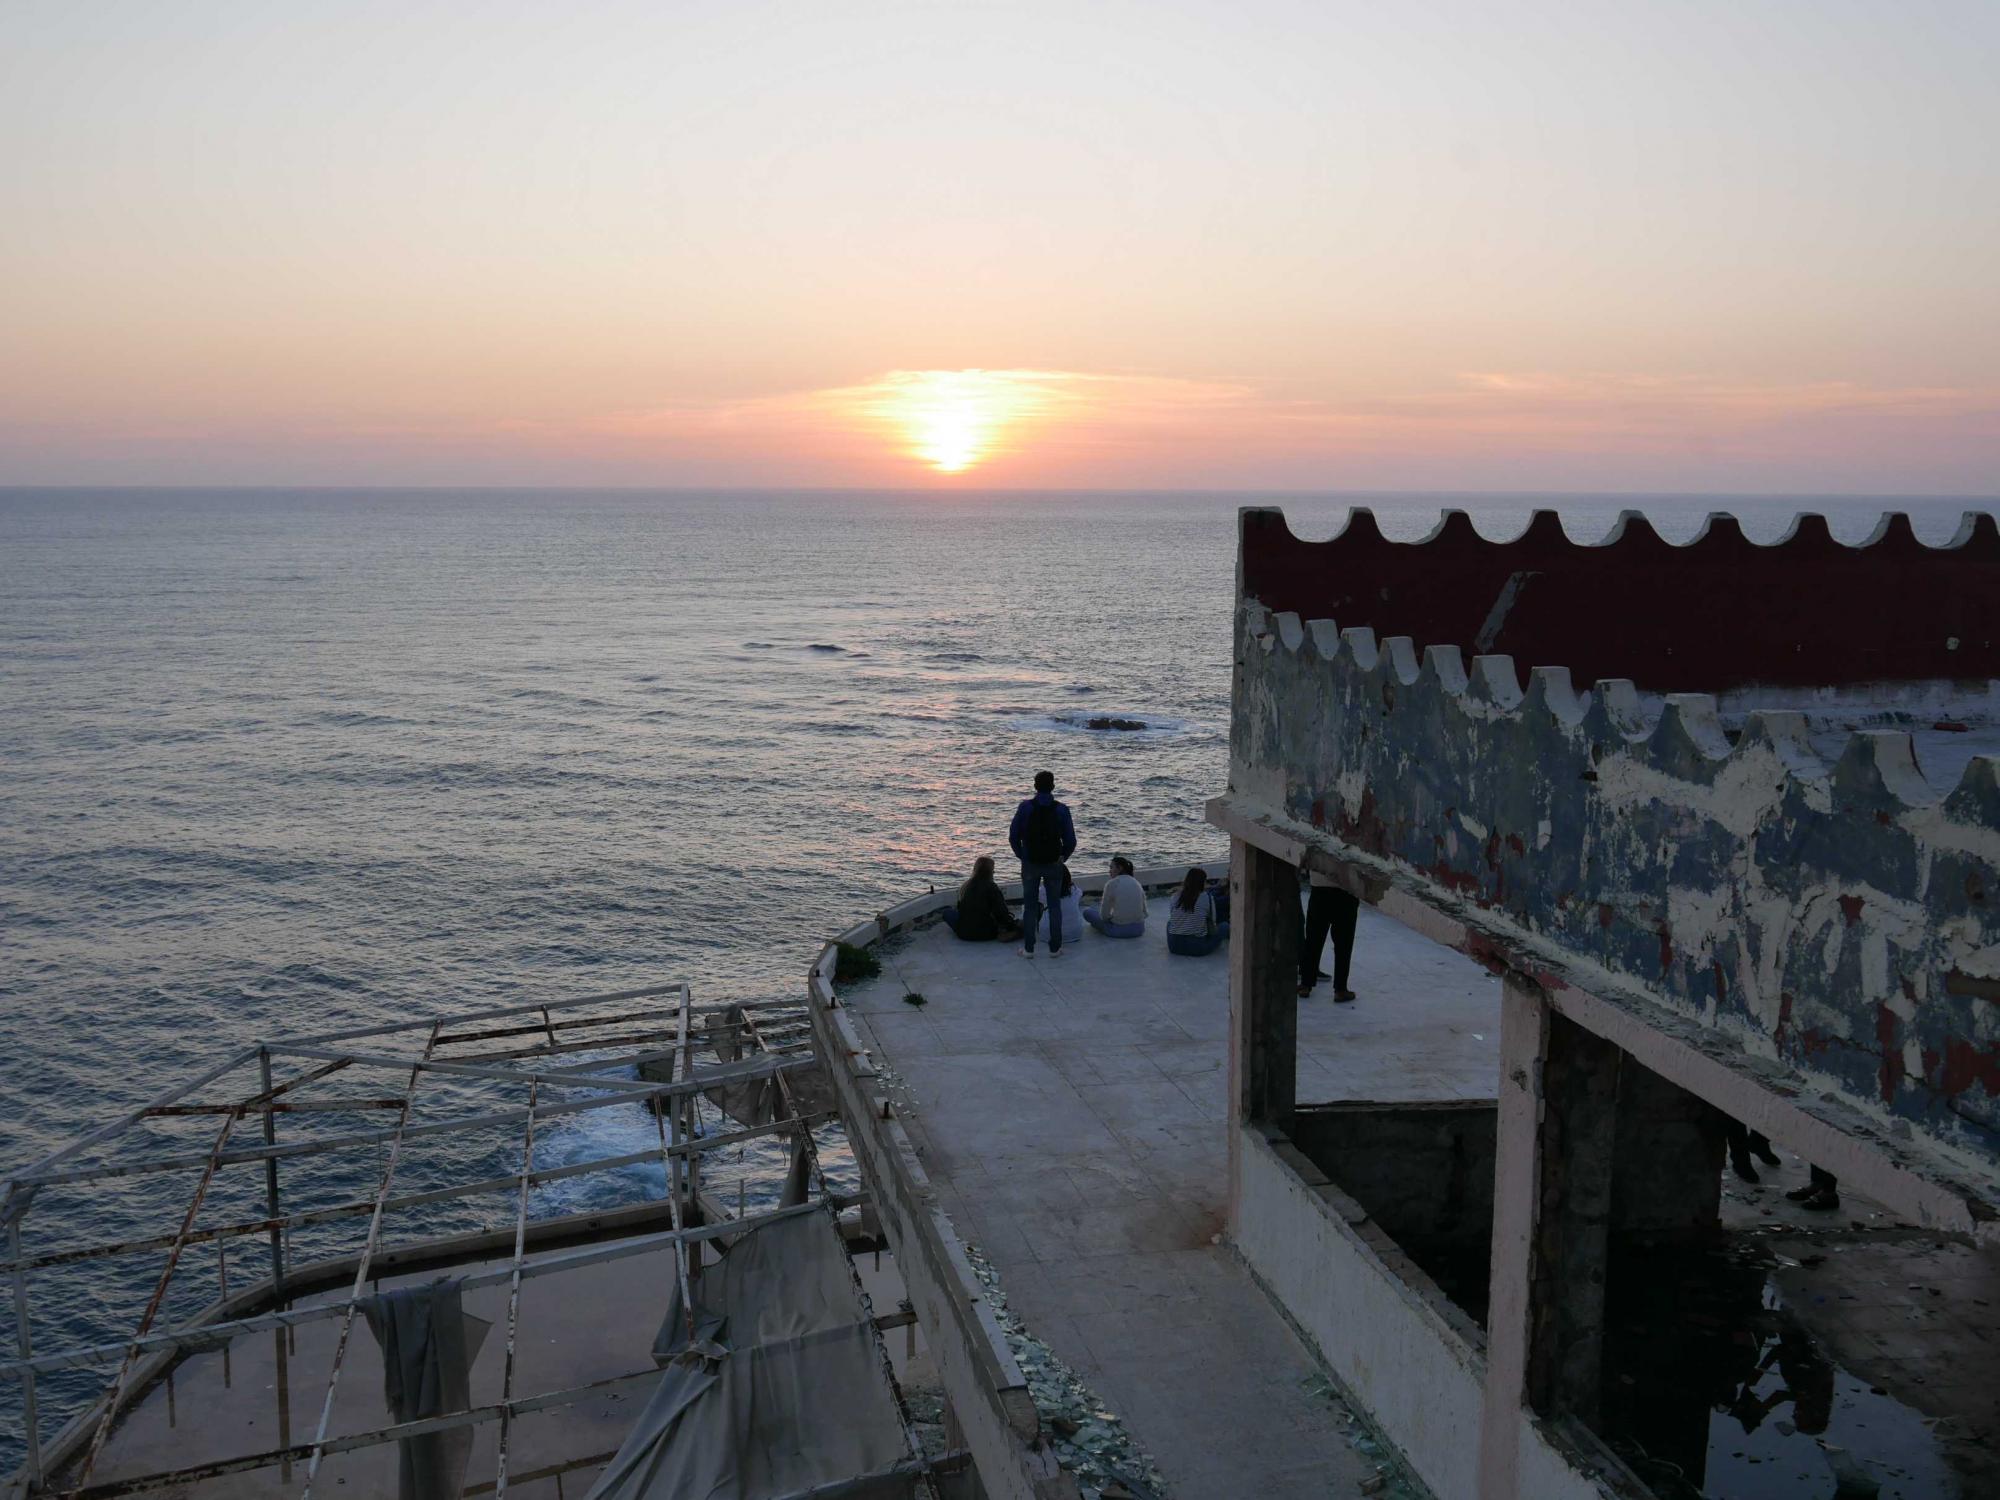 People watch the sunset from a roof terrace in the Mar Kikhal district. Photo: Elena Athina Mieslinger (Instagram: @elena_athina)